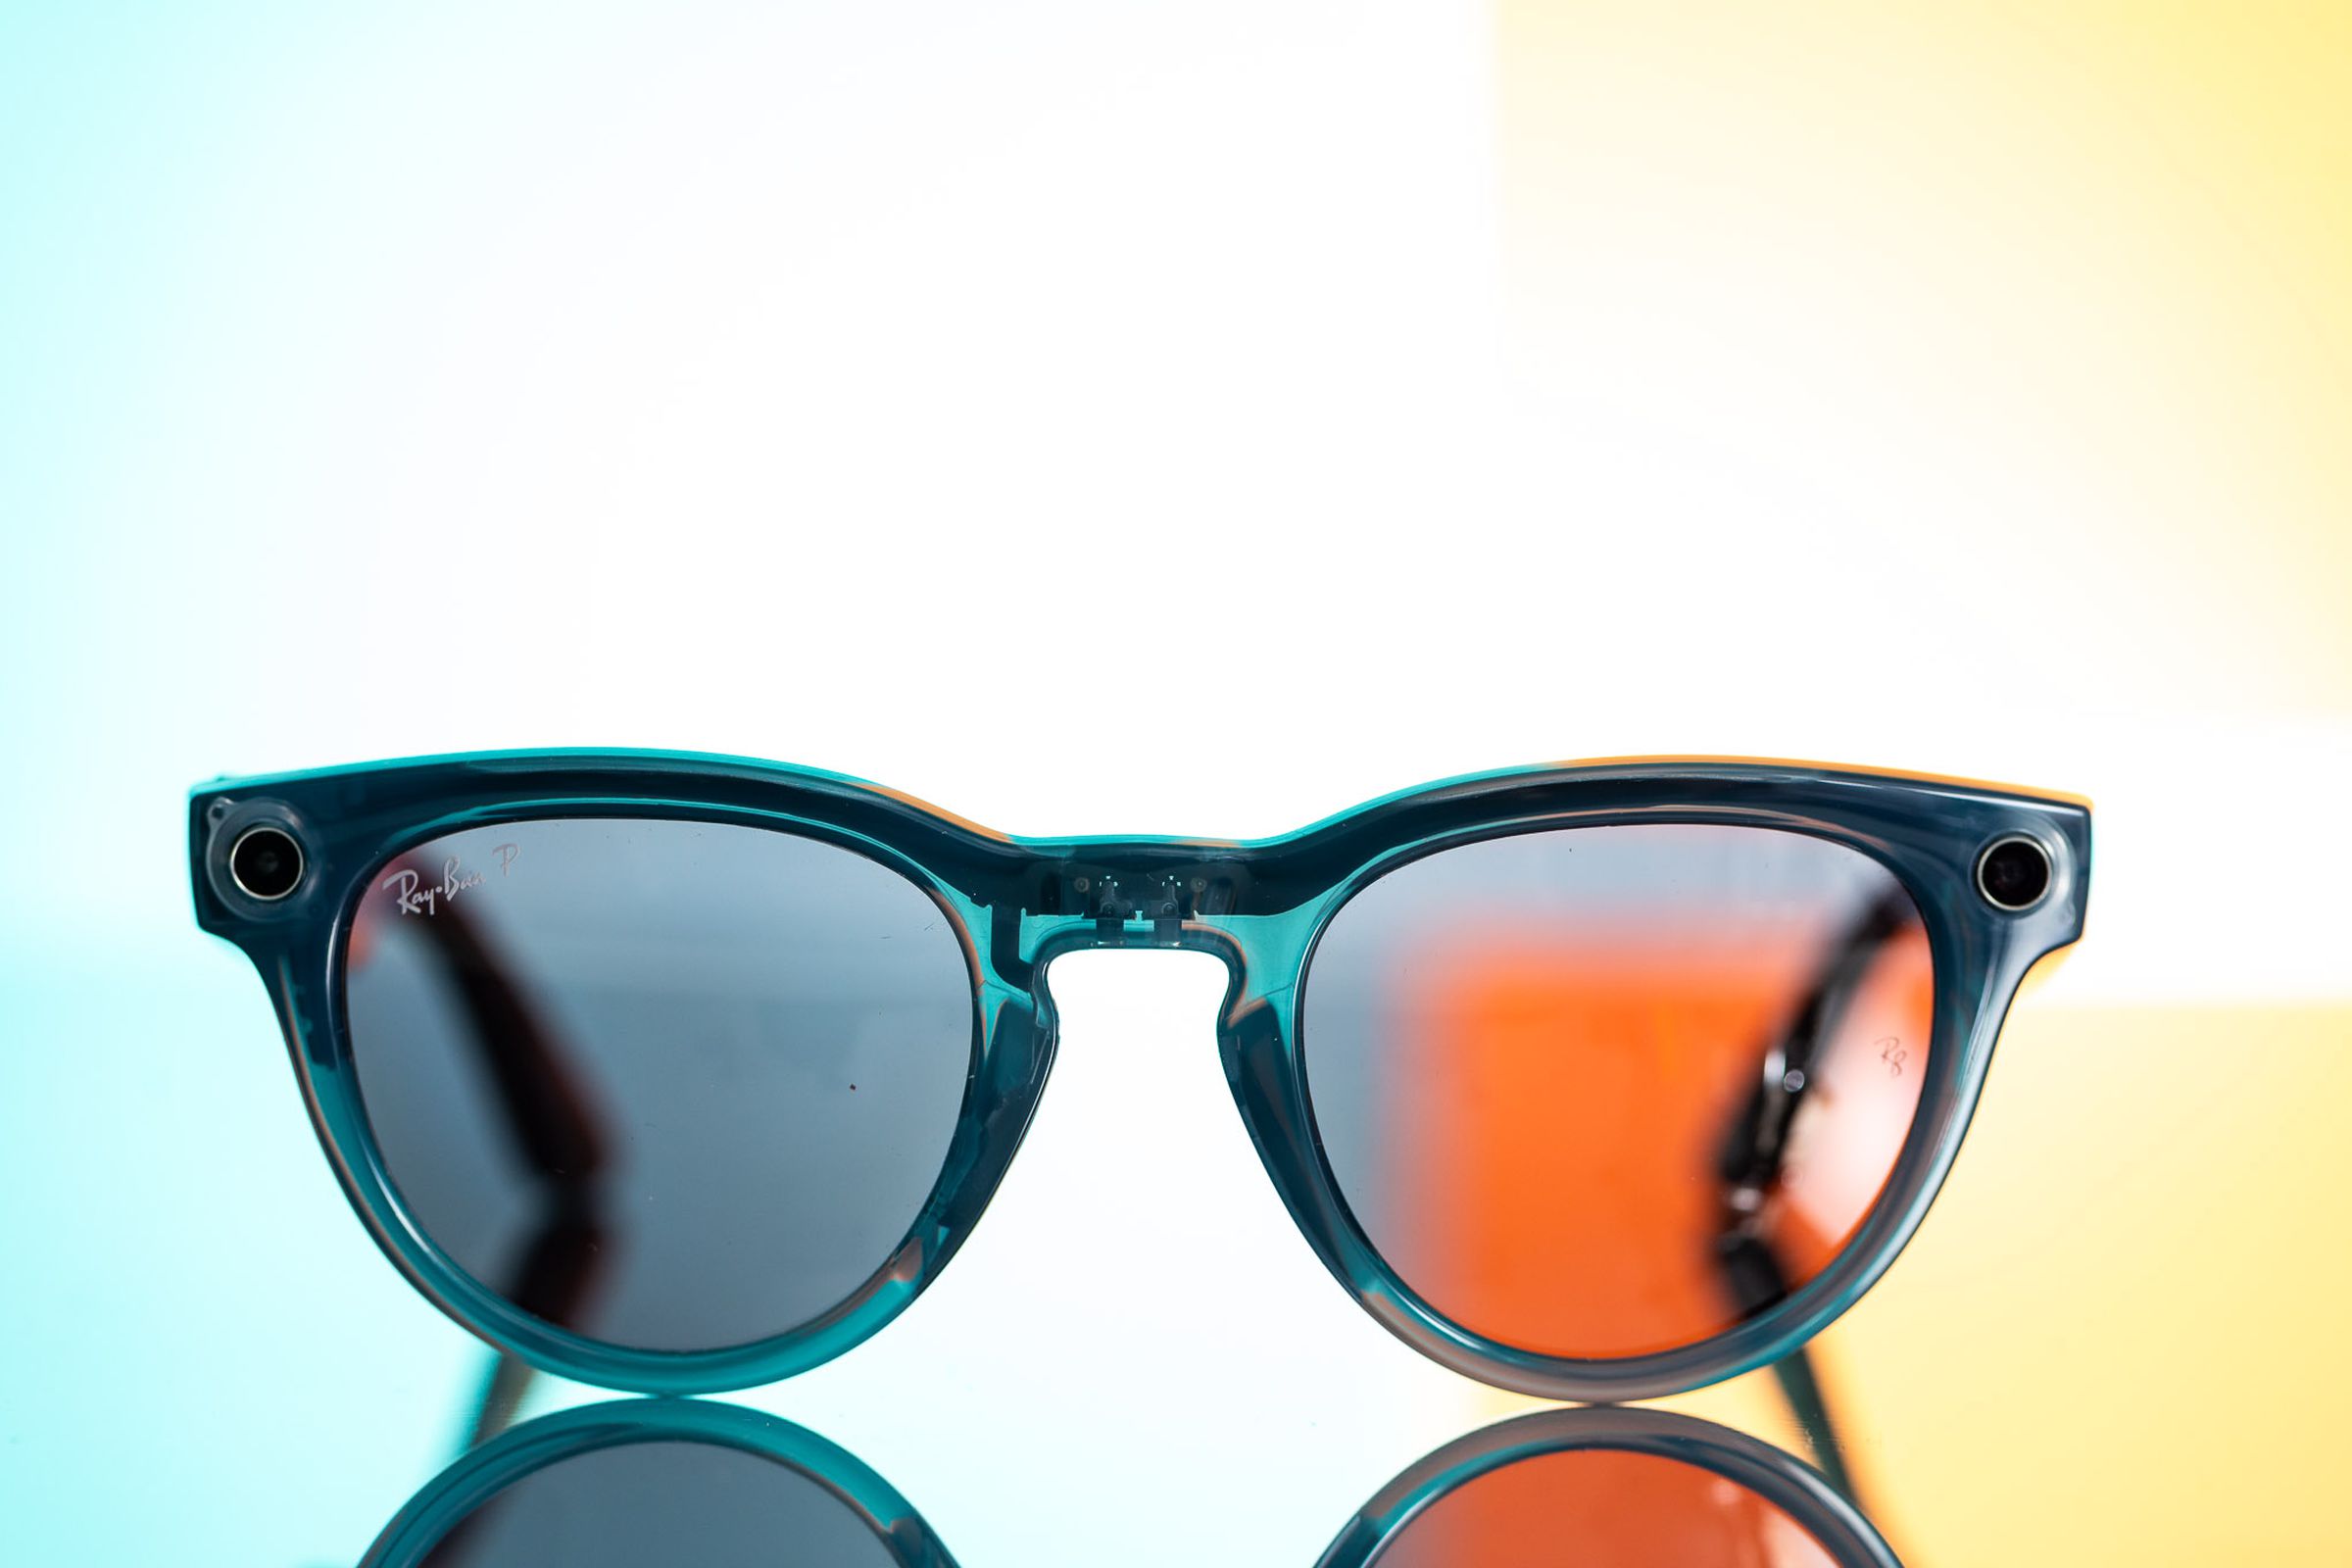 Front view of the Ray-Ban Meta smart glasses on a colorful background